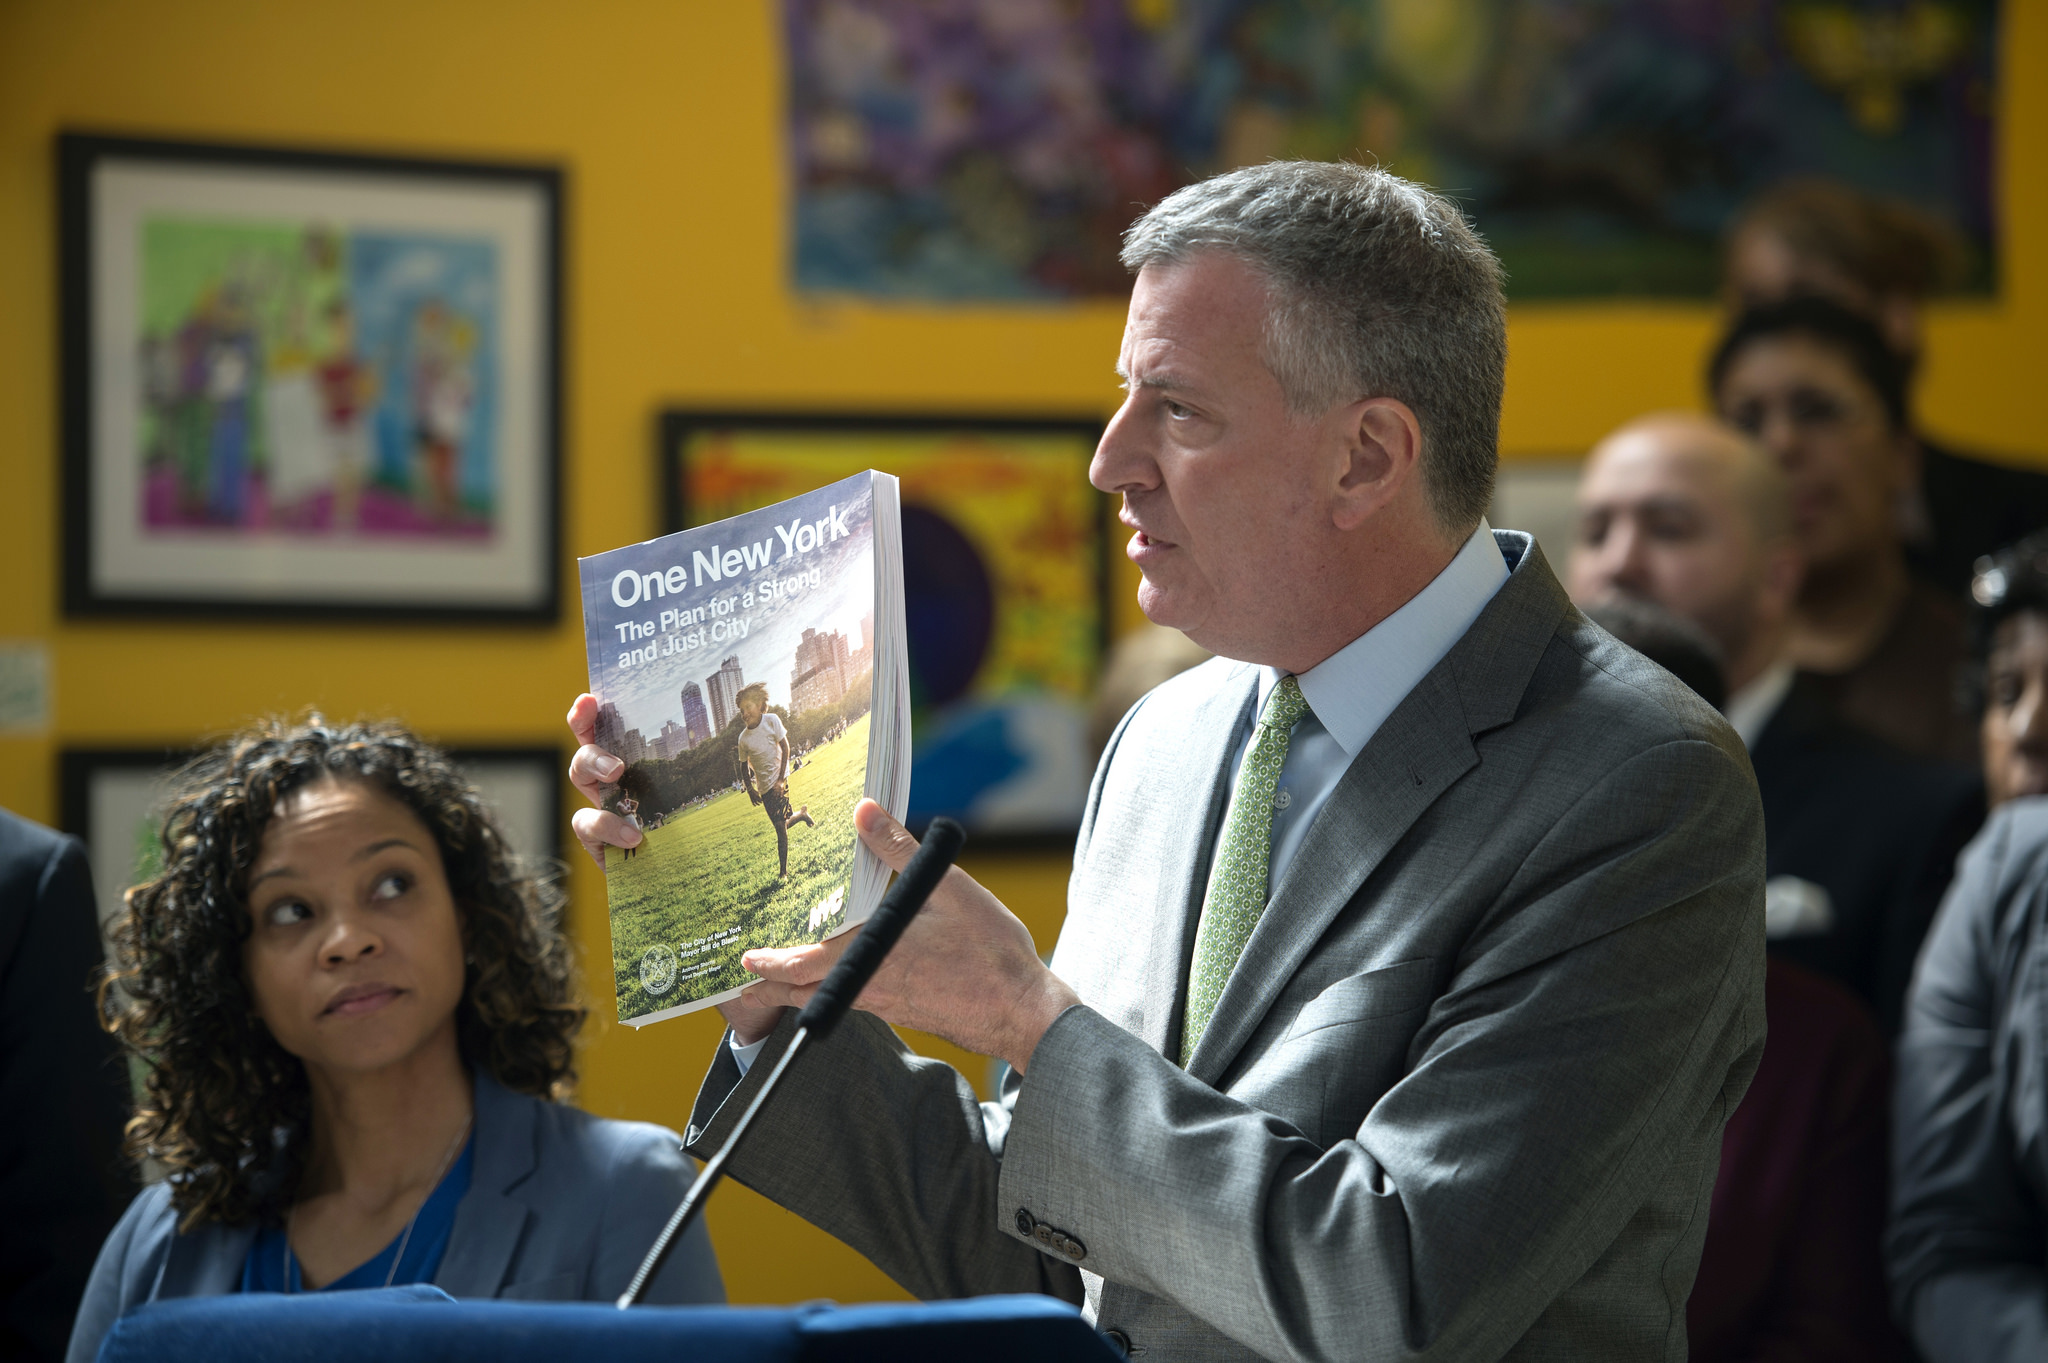 Mayor Bill de Blasio announces the release of “One New York: The Plan for a Strong and Just City" in the Bronx. (Demetrius Freeman/Mayoral Photography Office)